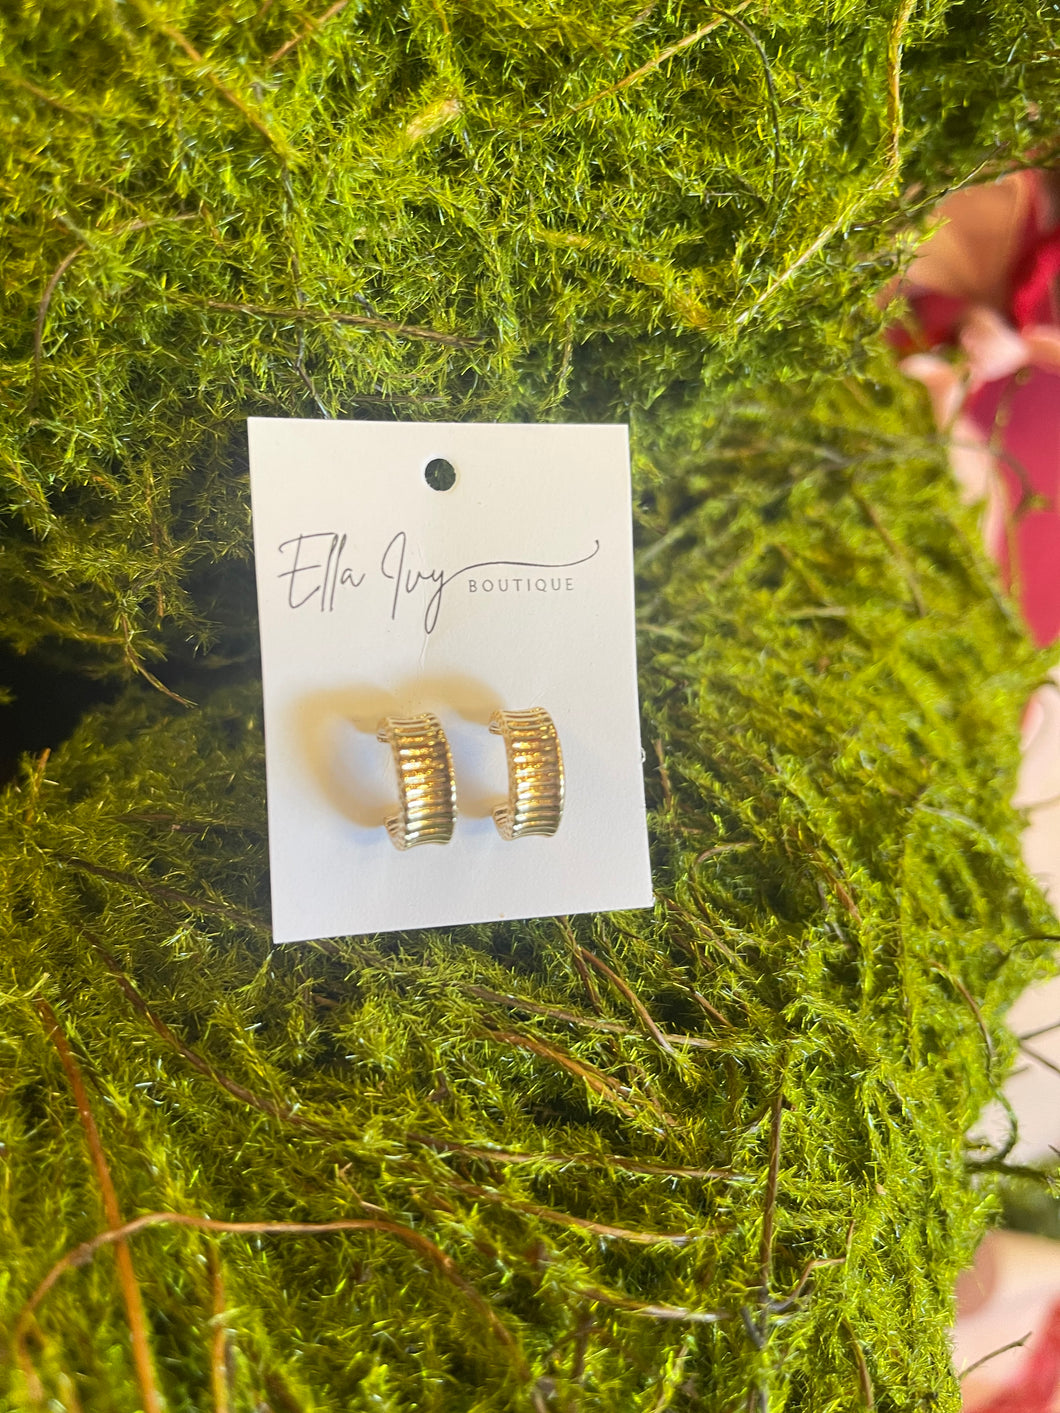 textured hoops in gold